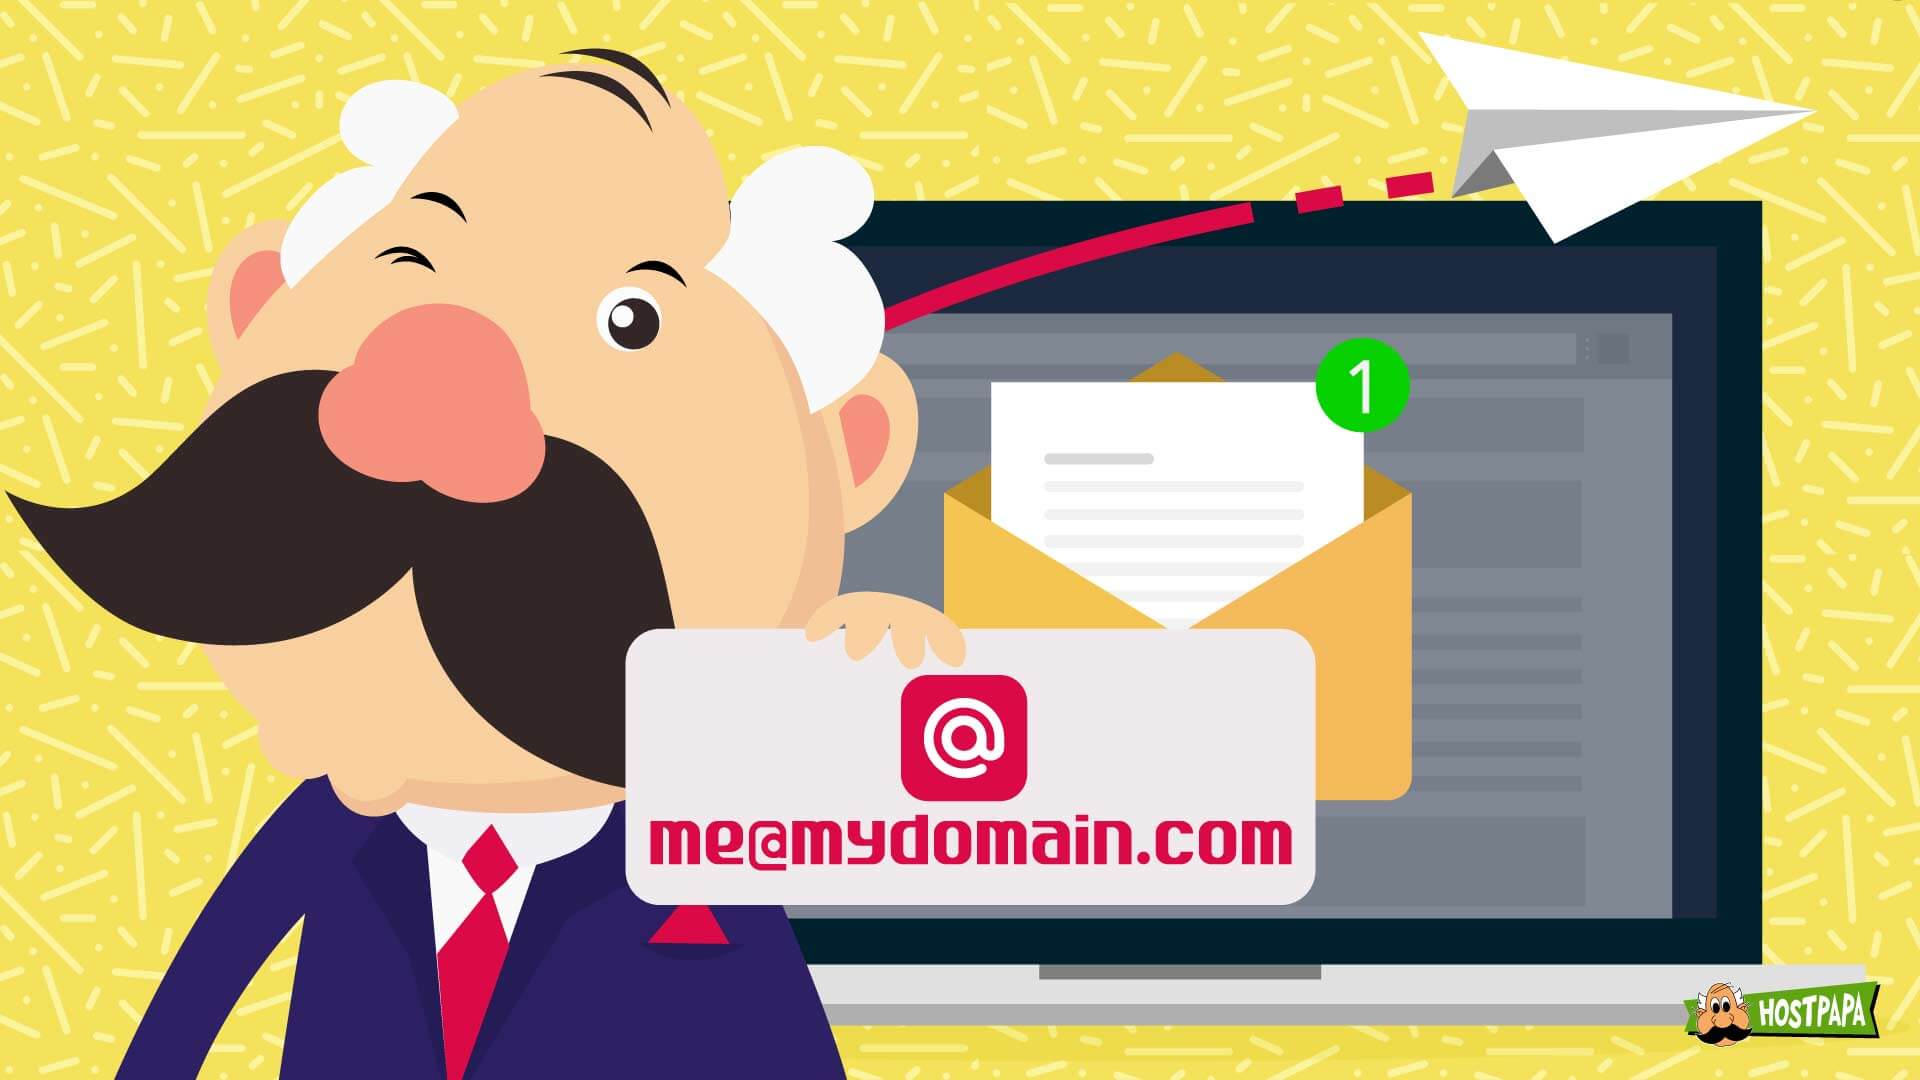 Why Does Your Business Need a Domain Email Address